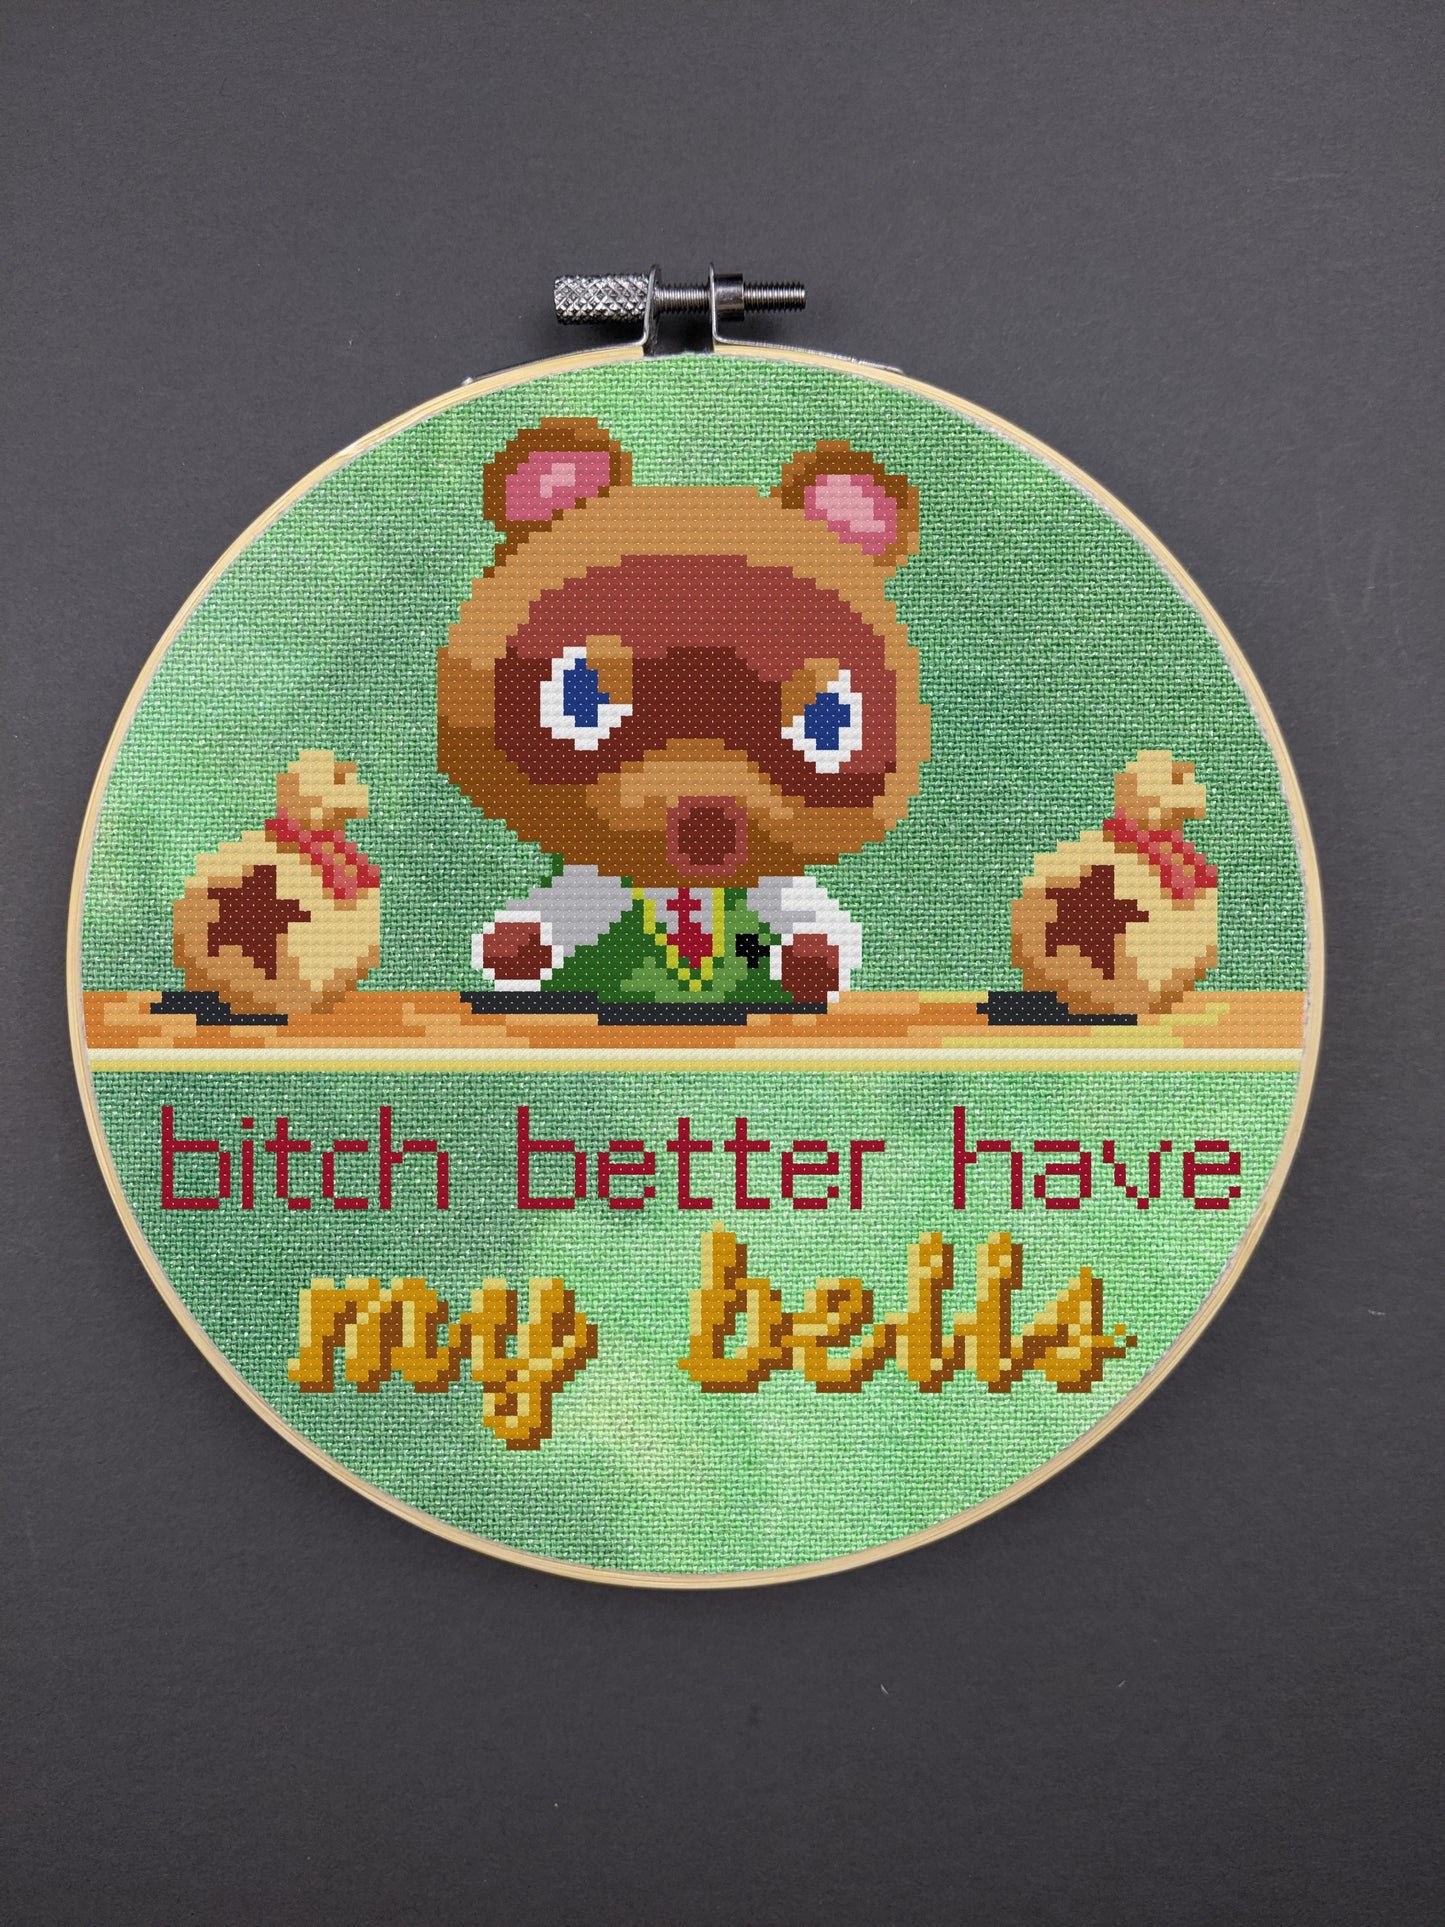 A digital rendering of a cross stitch depicting Tom Nook from Animal Crossing New Horizons sitting at his desk with an angry look on his face. He is flanked by two bags of bells laying on his desk. Text under the desk reads "bitch better have my bells", with the words "my bells" being cursive and golden.  The stitch is depicted on a green hand-dyed opalescent aida and displayed in a hoop on a gray background.